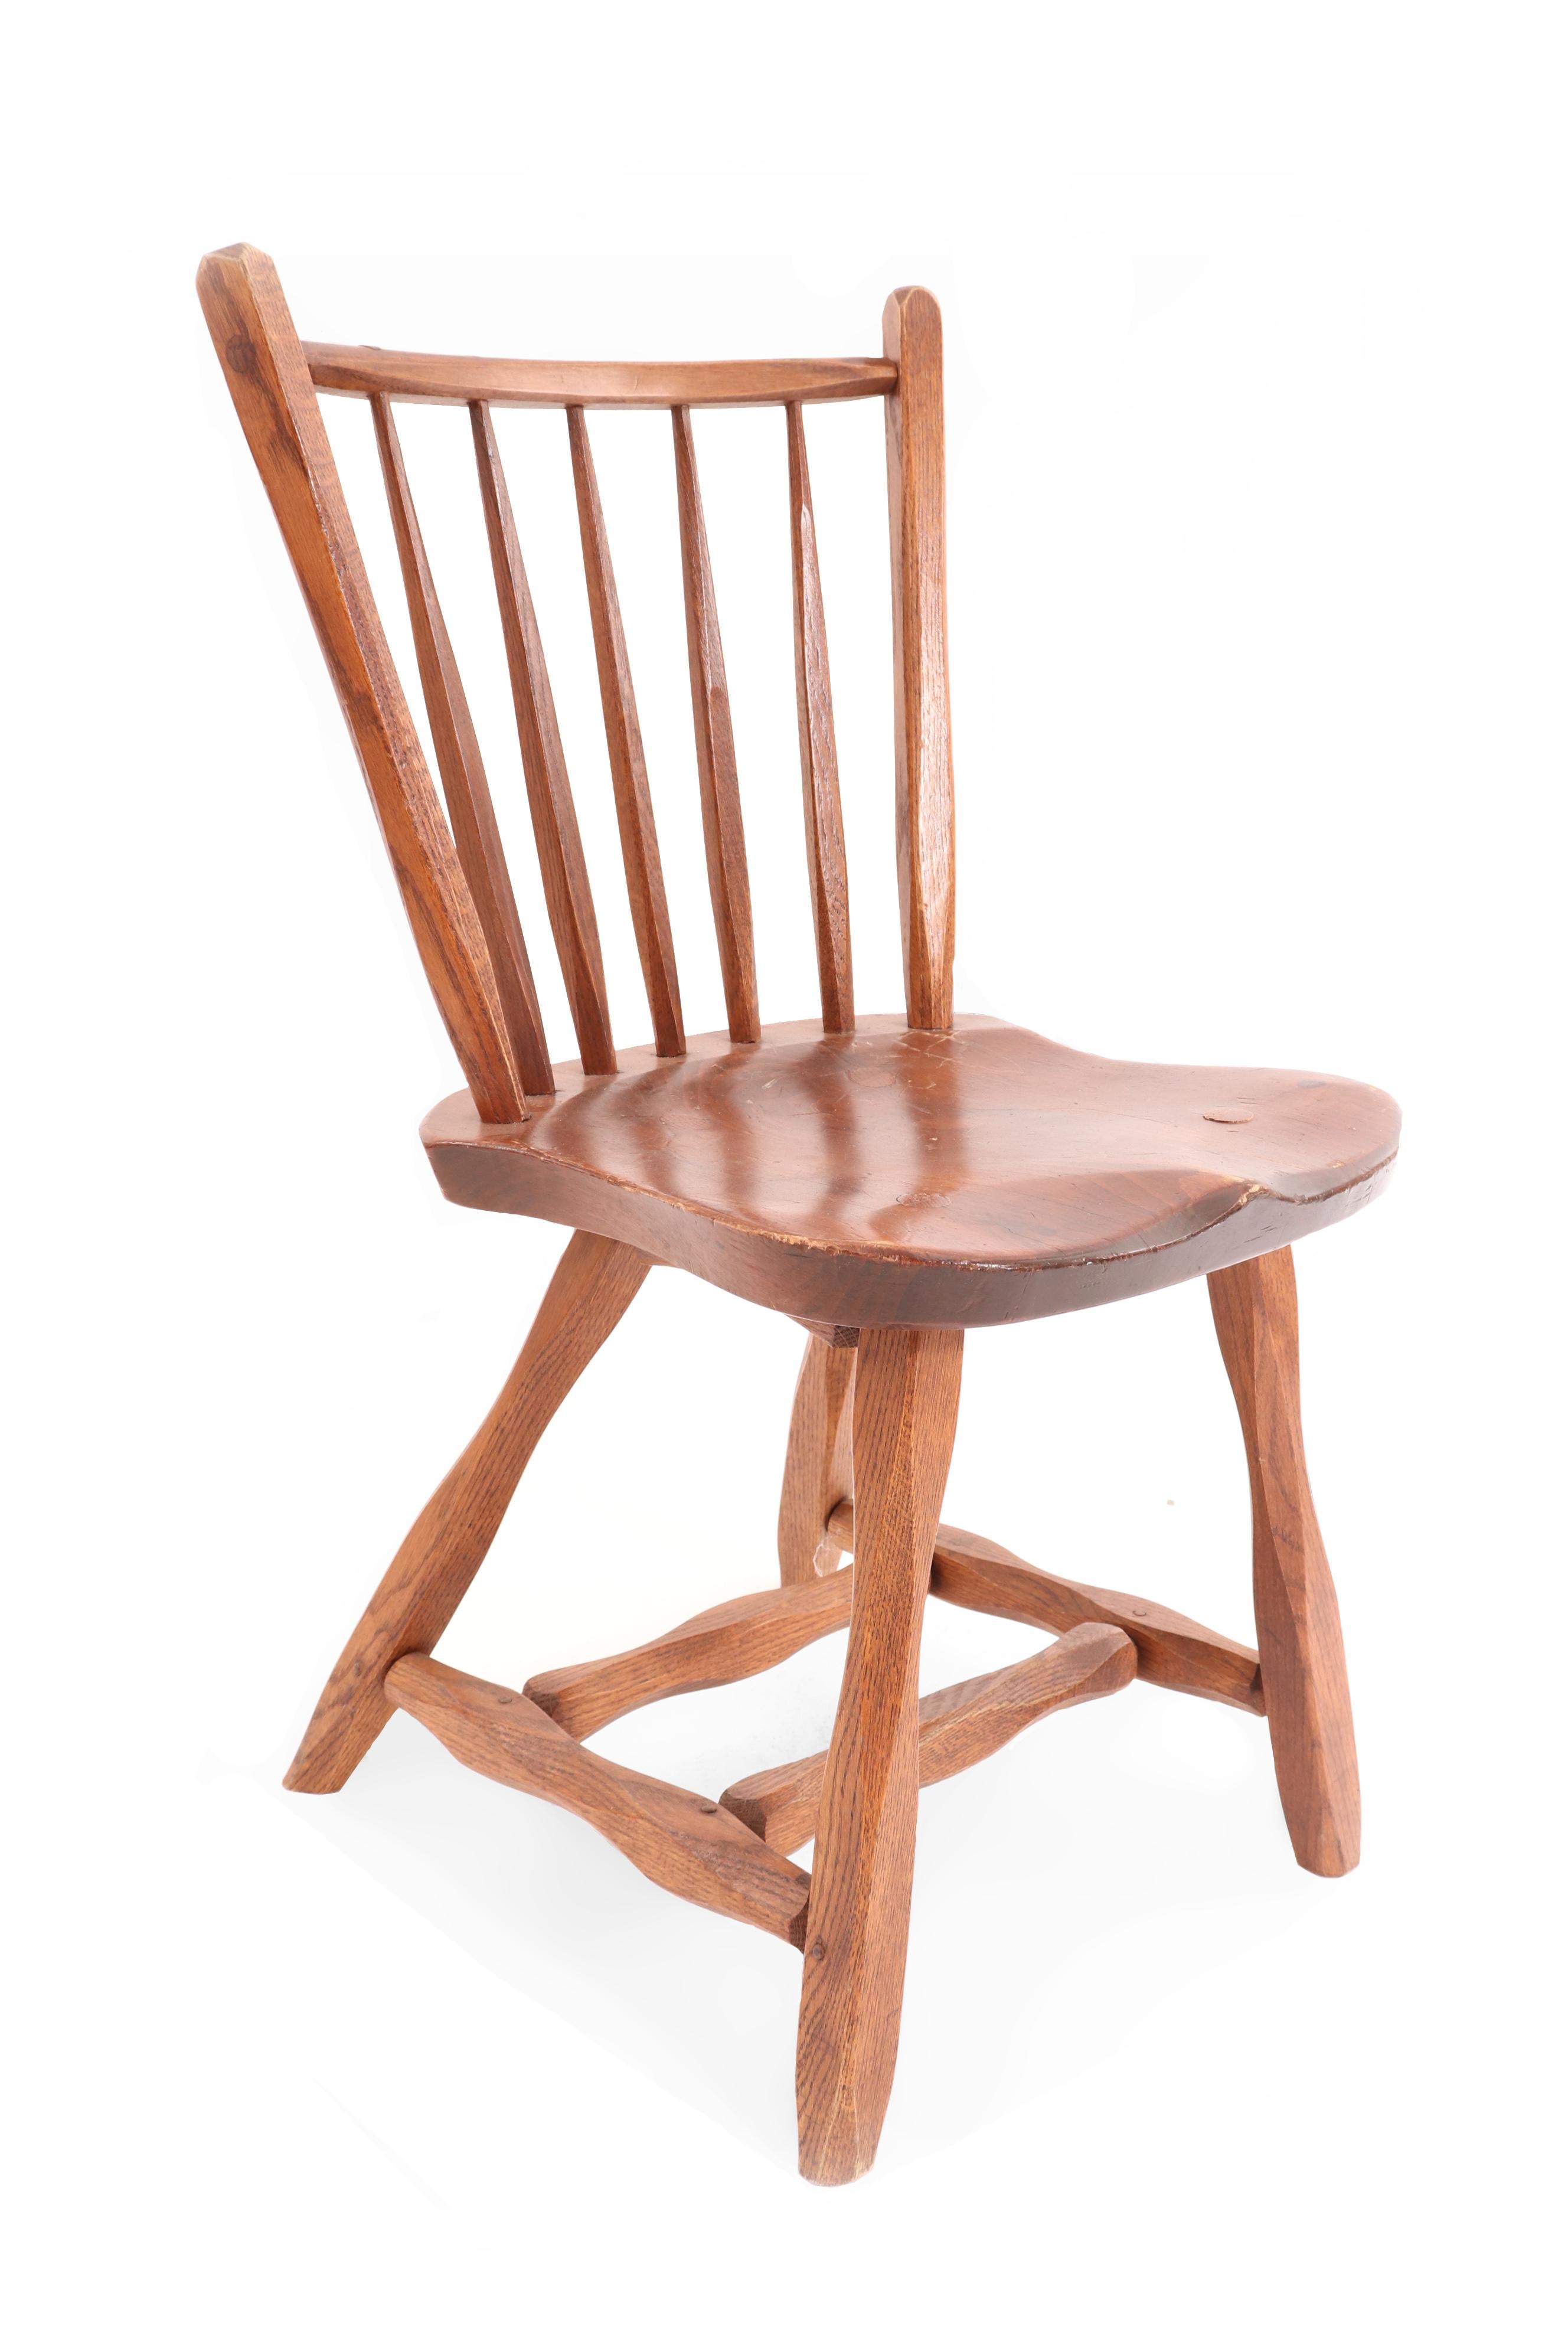 7 American Country wooden Windsor-style dining / side chairs with spindle back and a stretch base (HUNT COUNTRY FURNITURE label) (priced each).
     